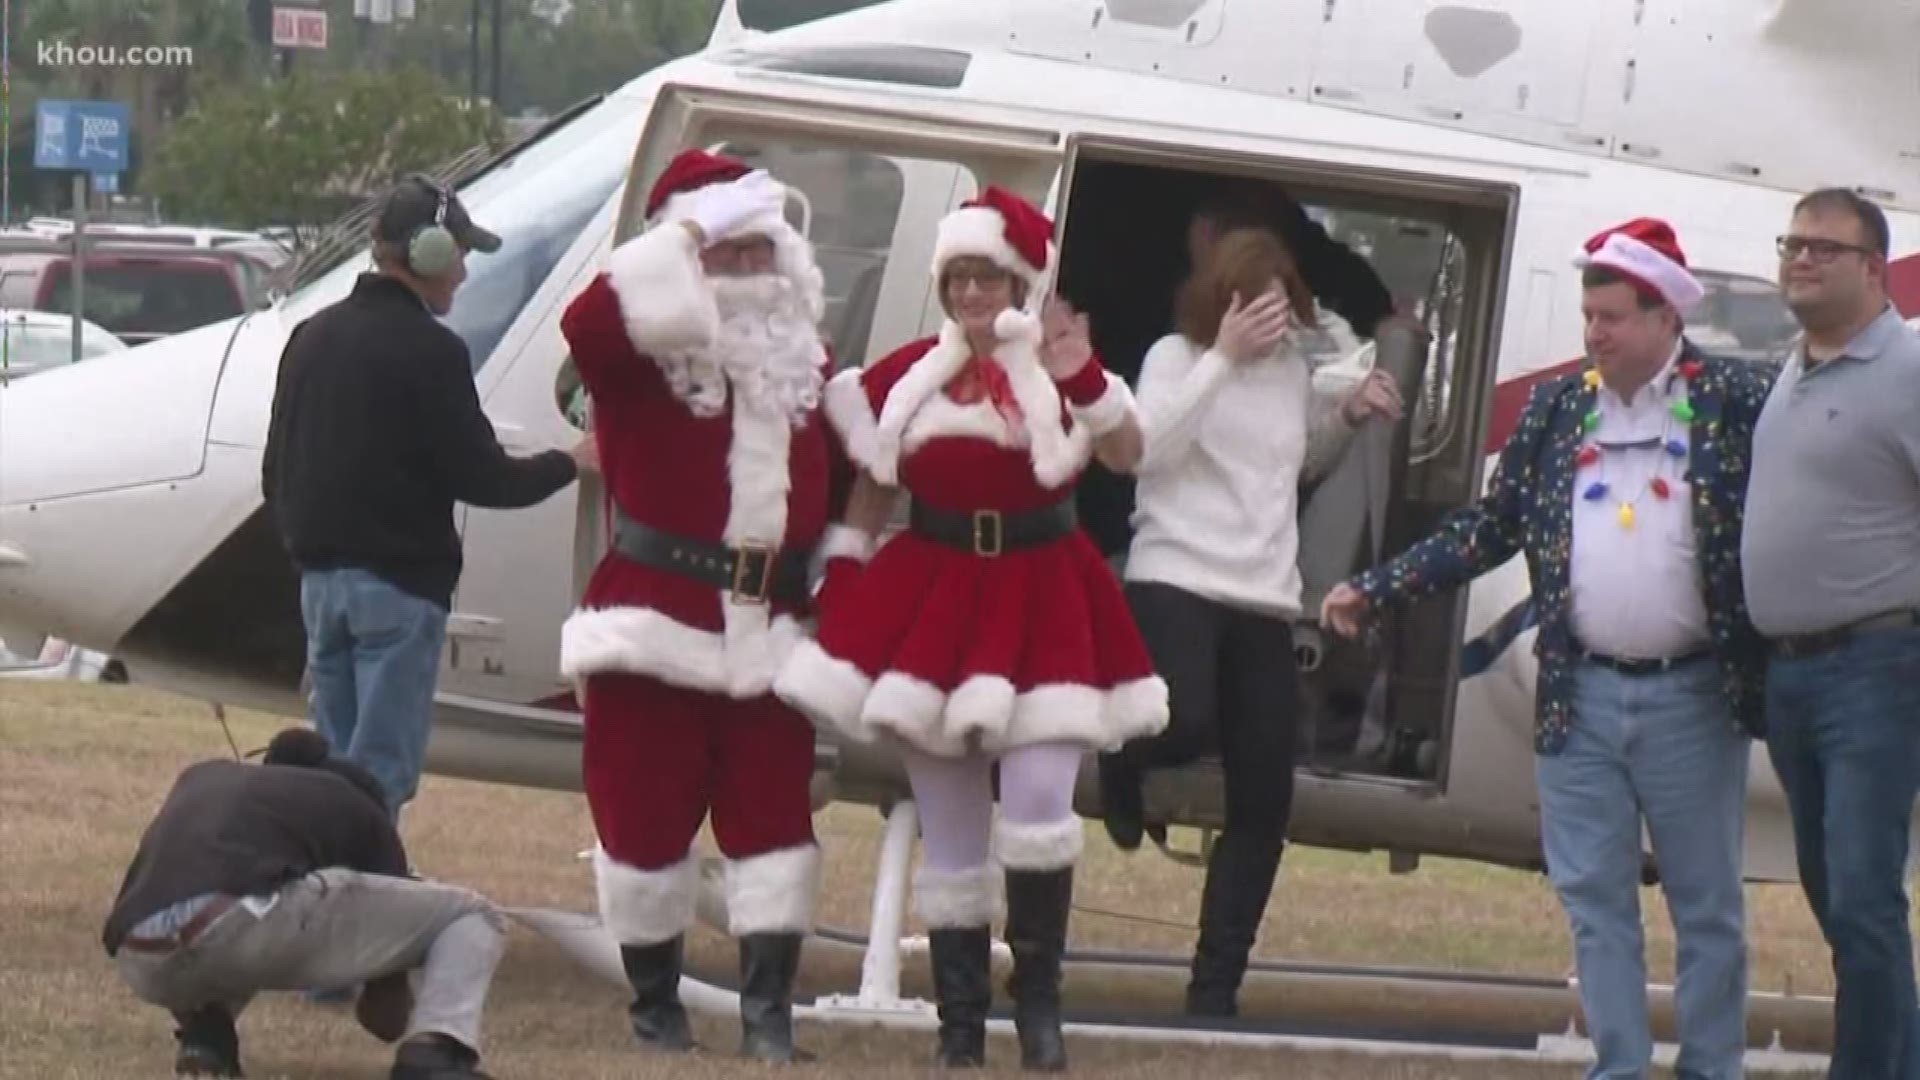 Santa Claus traded in his sleigh for a helicopter Friday. He touched down at Northline Commons mall to greet Black Friday shoppers.